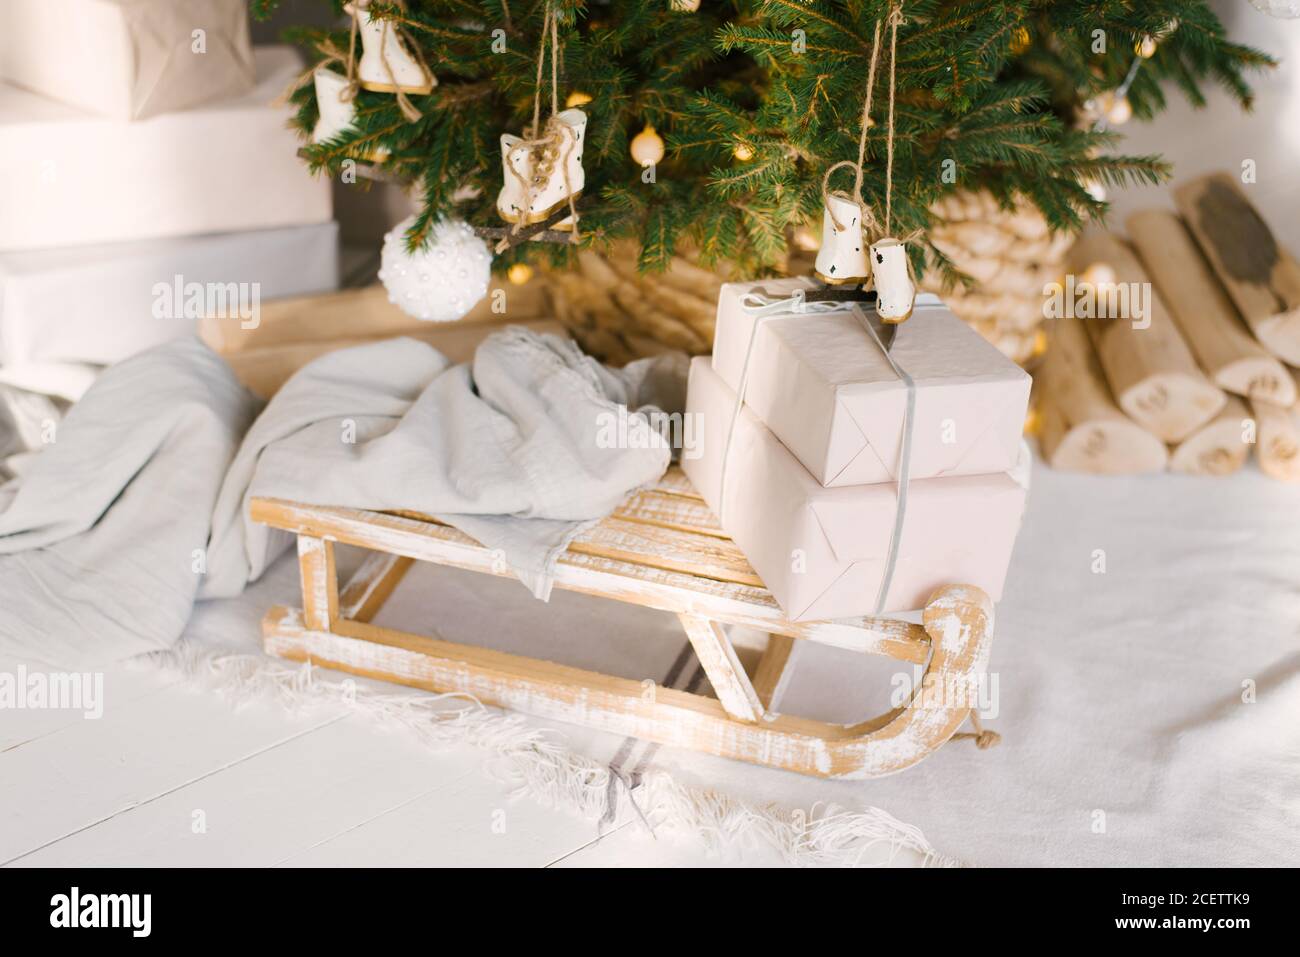 Wooden vintage sleigh with a blanket and gifts under the Christmas tree. Christmas decor in the interior of the house Stock Photo